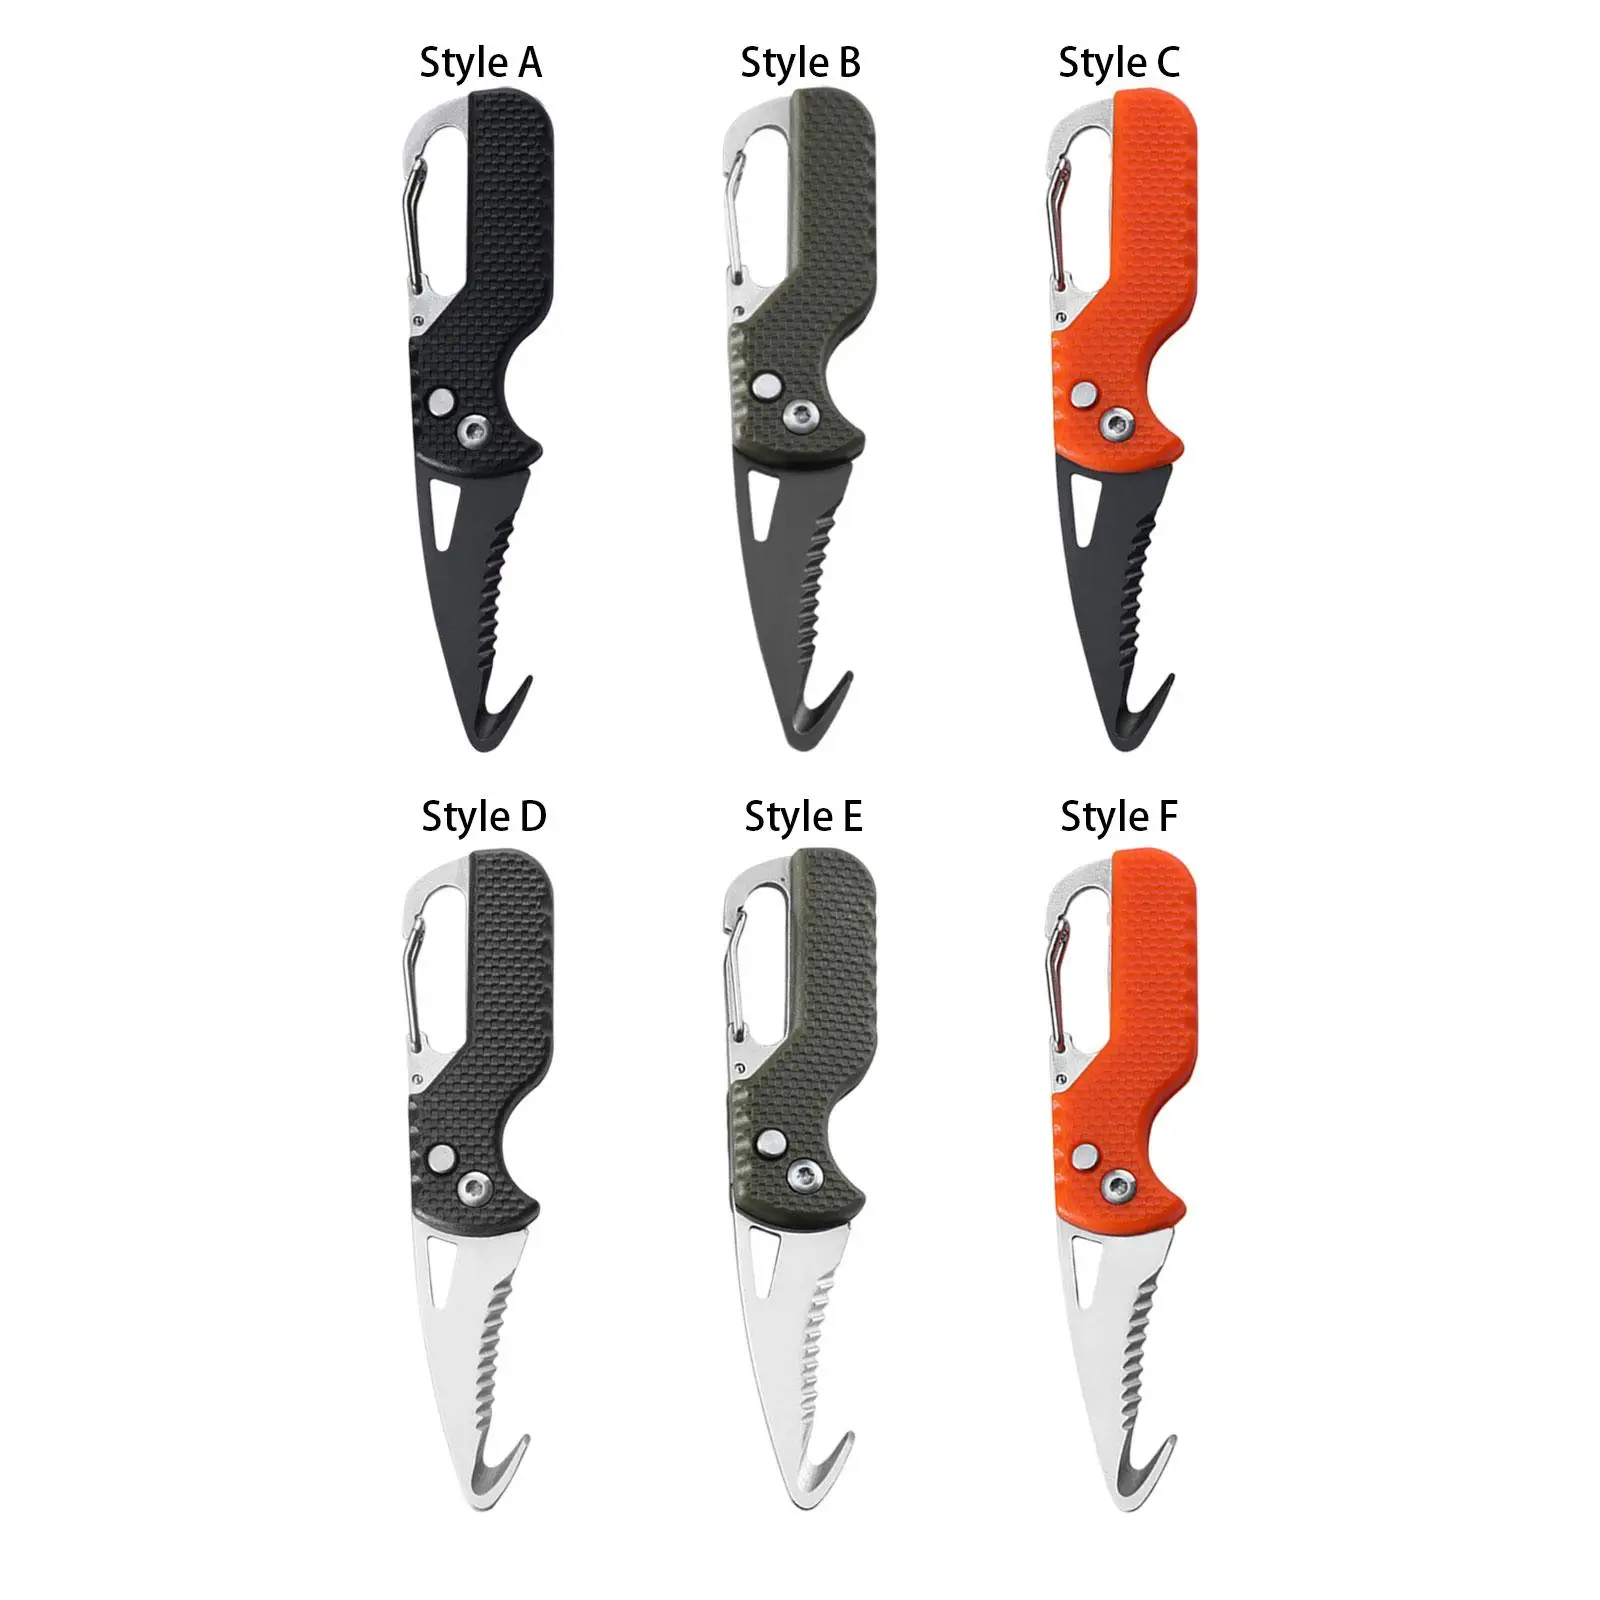 Pocket Multitool Cutter Hook Remover Durable Emergency Multi Tool Portable Cutter for Camping Survival Outdoor Hiking Fishing